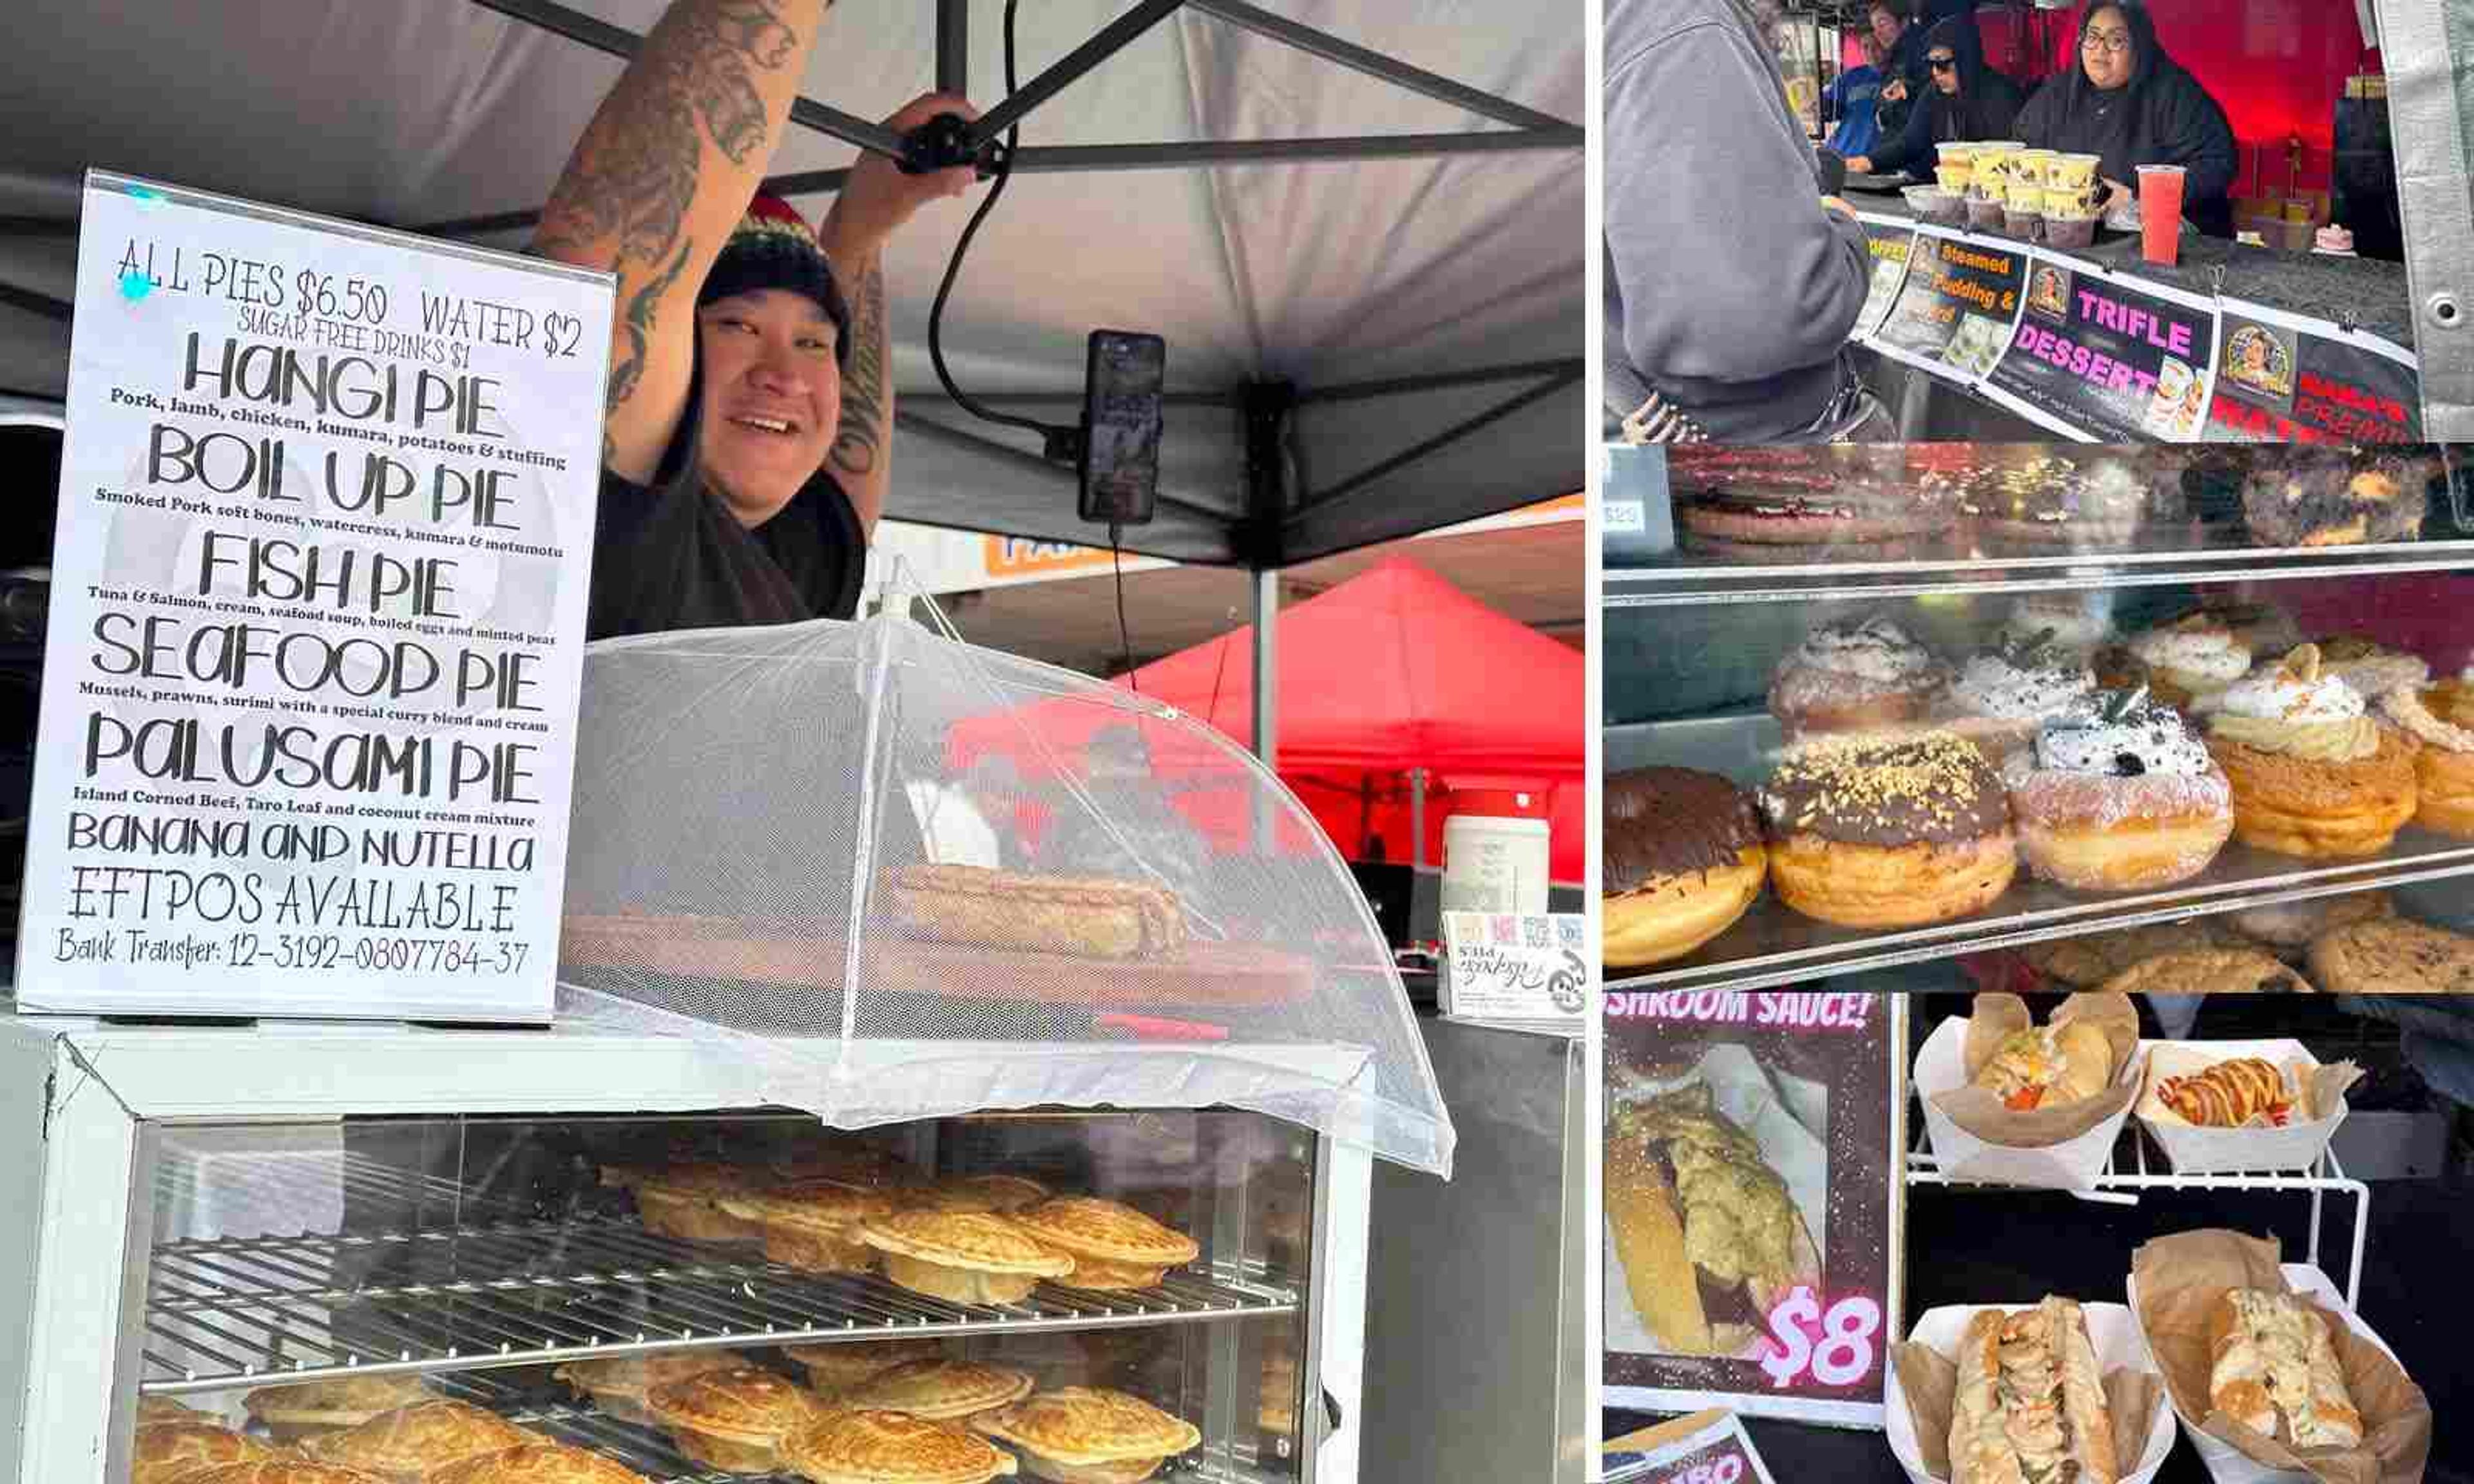 A range of culinary delights were on offer at the Ōtāhuhu Food Festival.